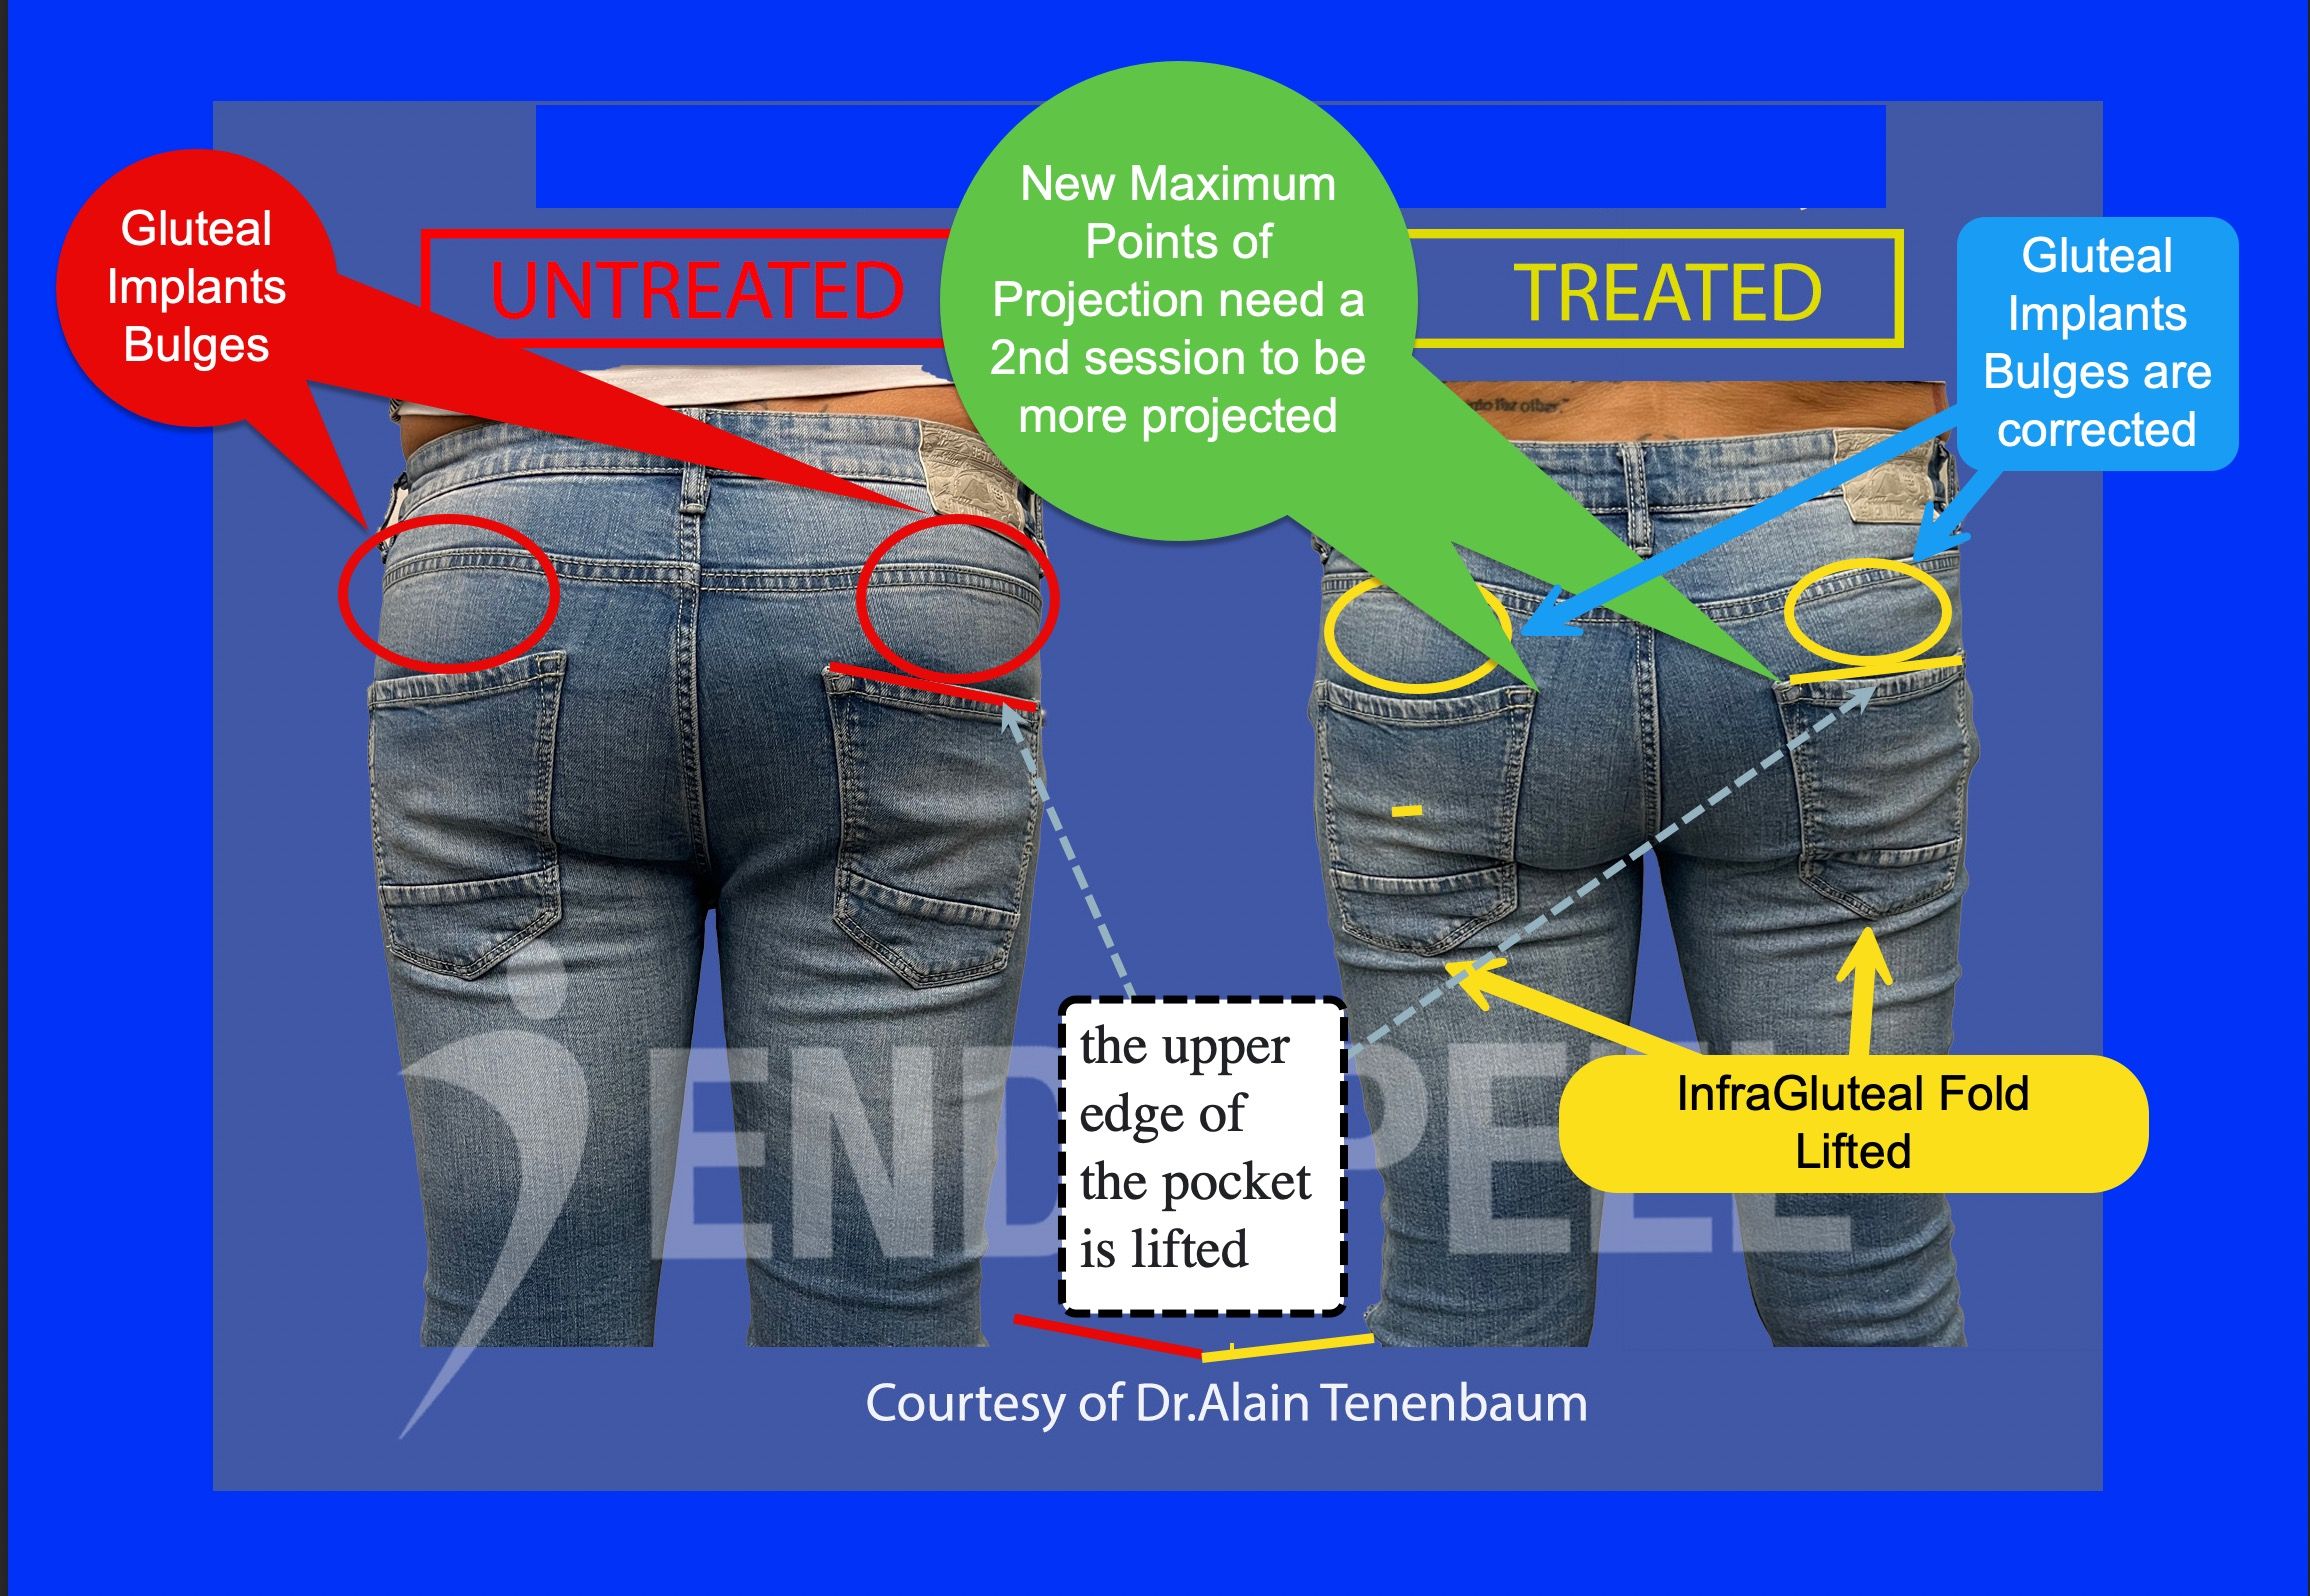 between-1st-and-2nd-session-post-male-gluteal-implants.jpg